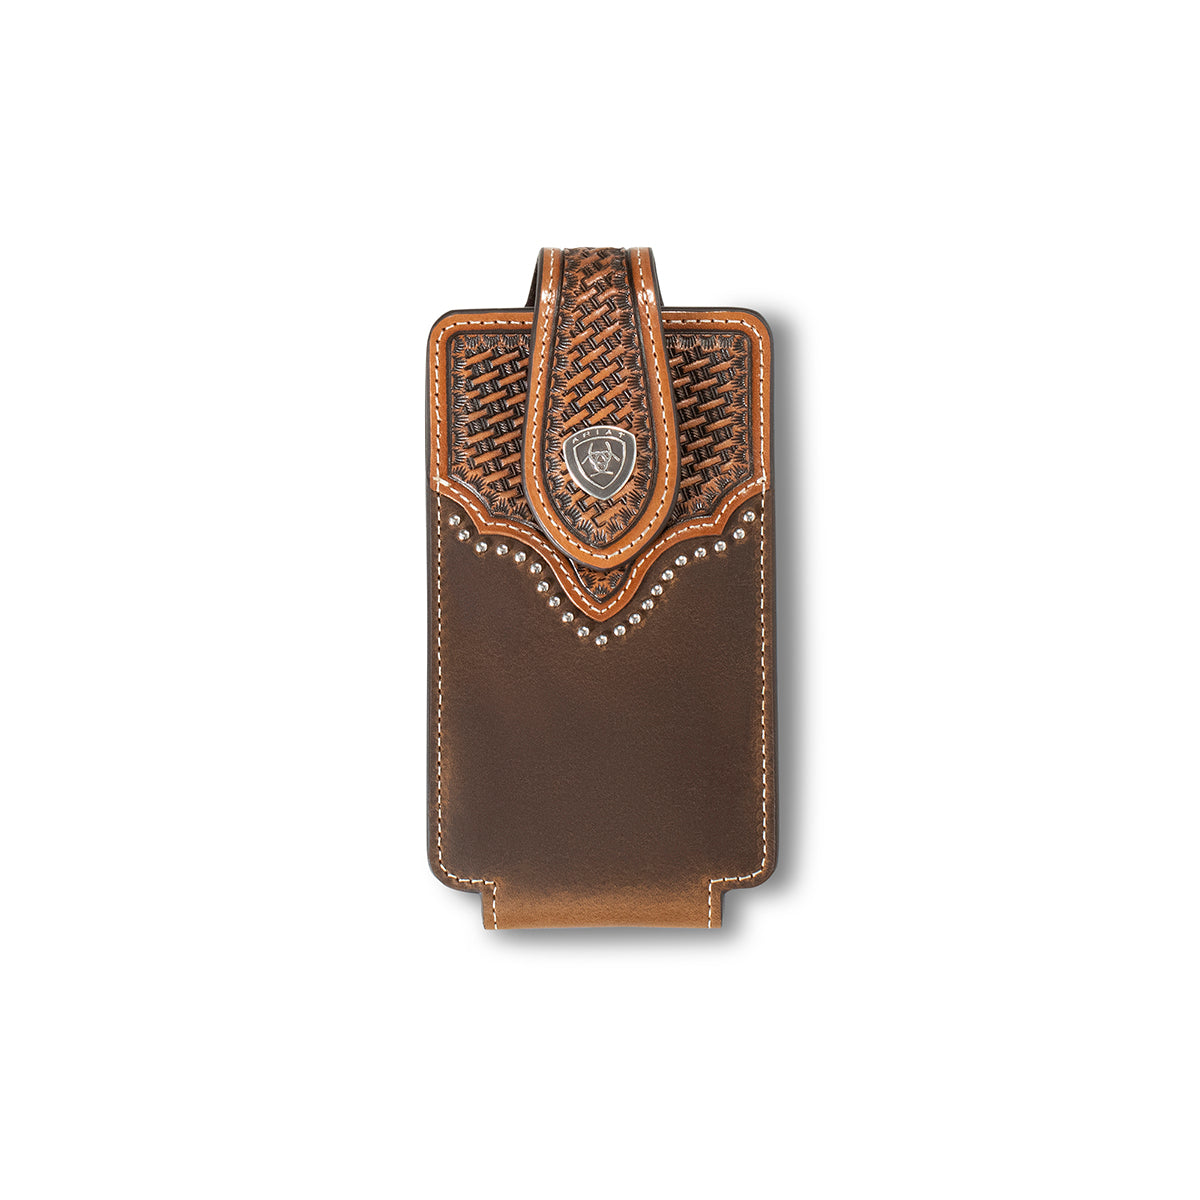 Ariat Leather Cell Phone Case - Brown Basketweave & Sunburst Embossing